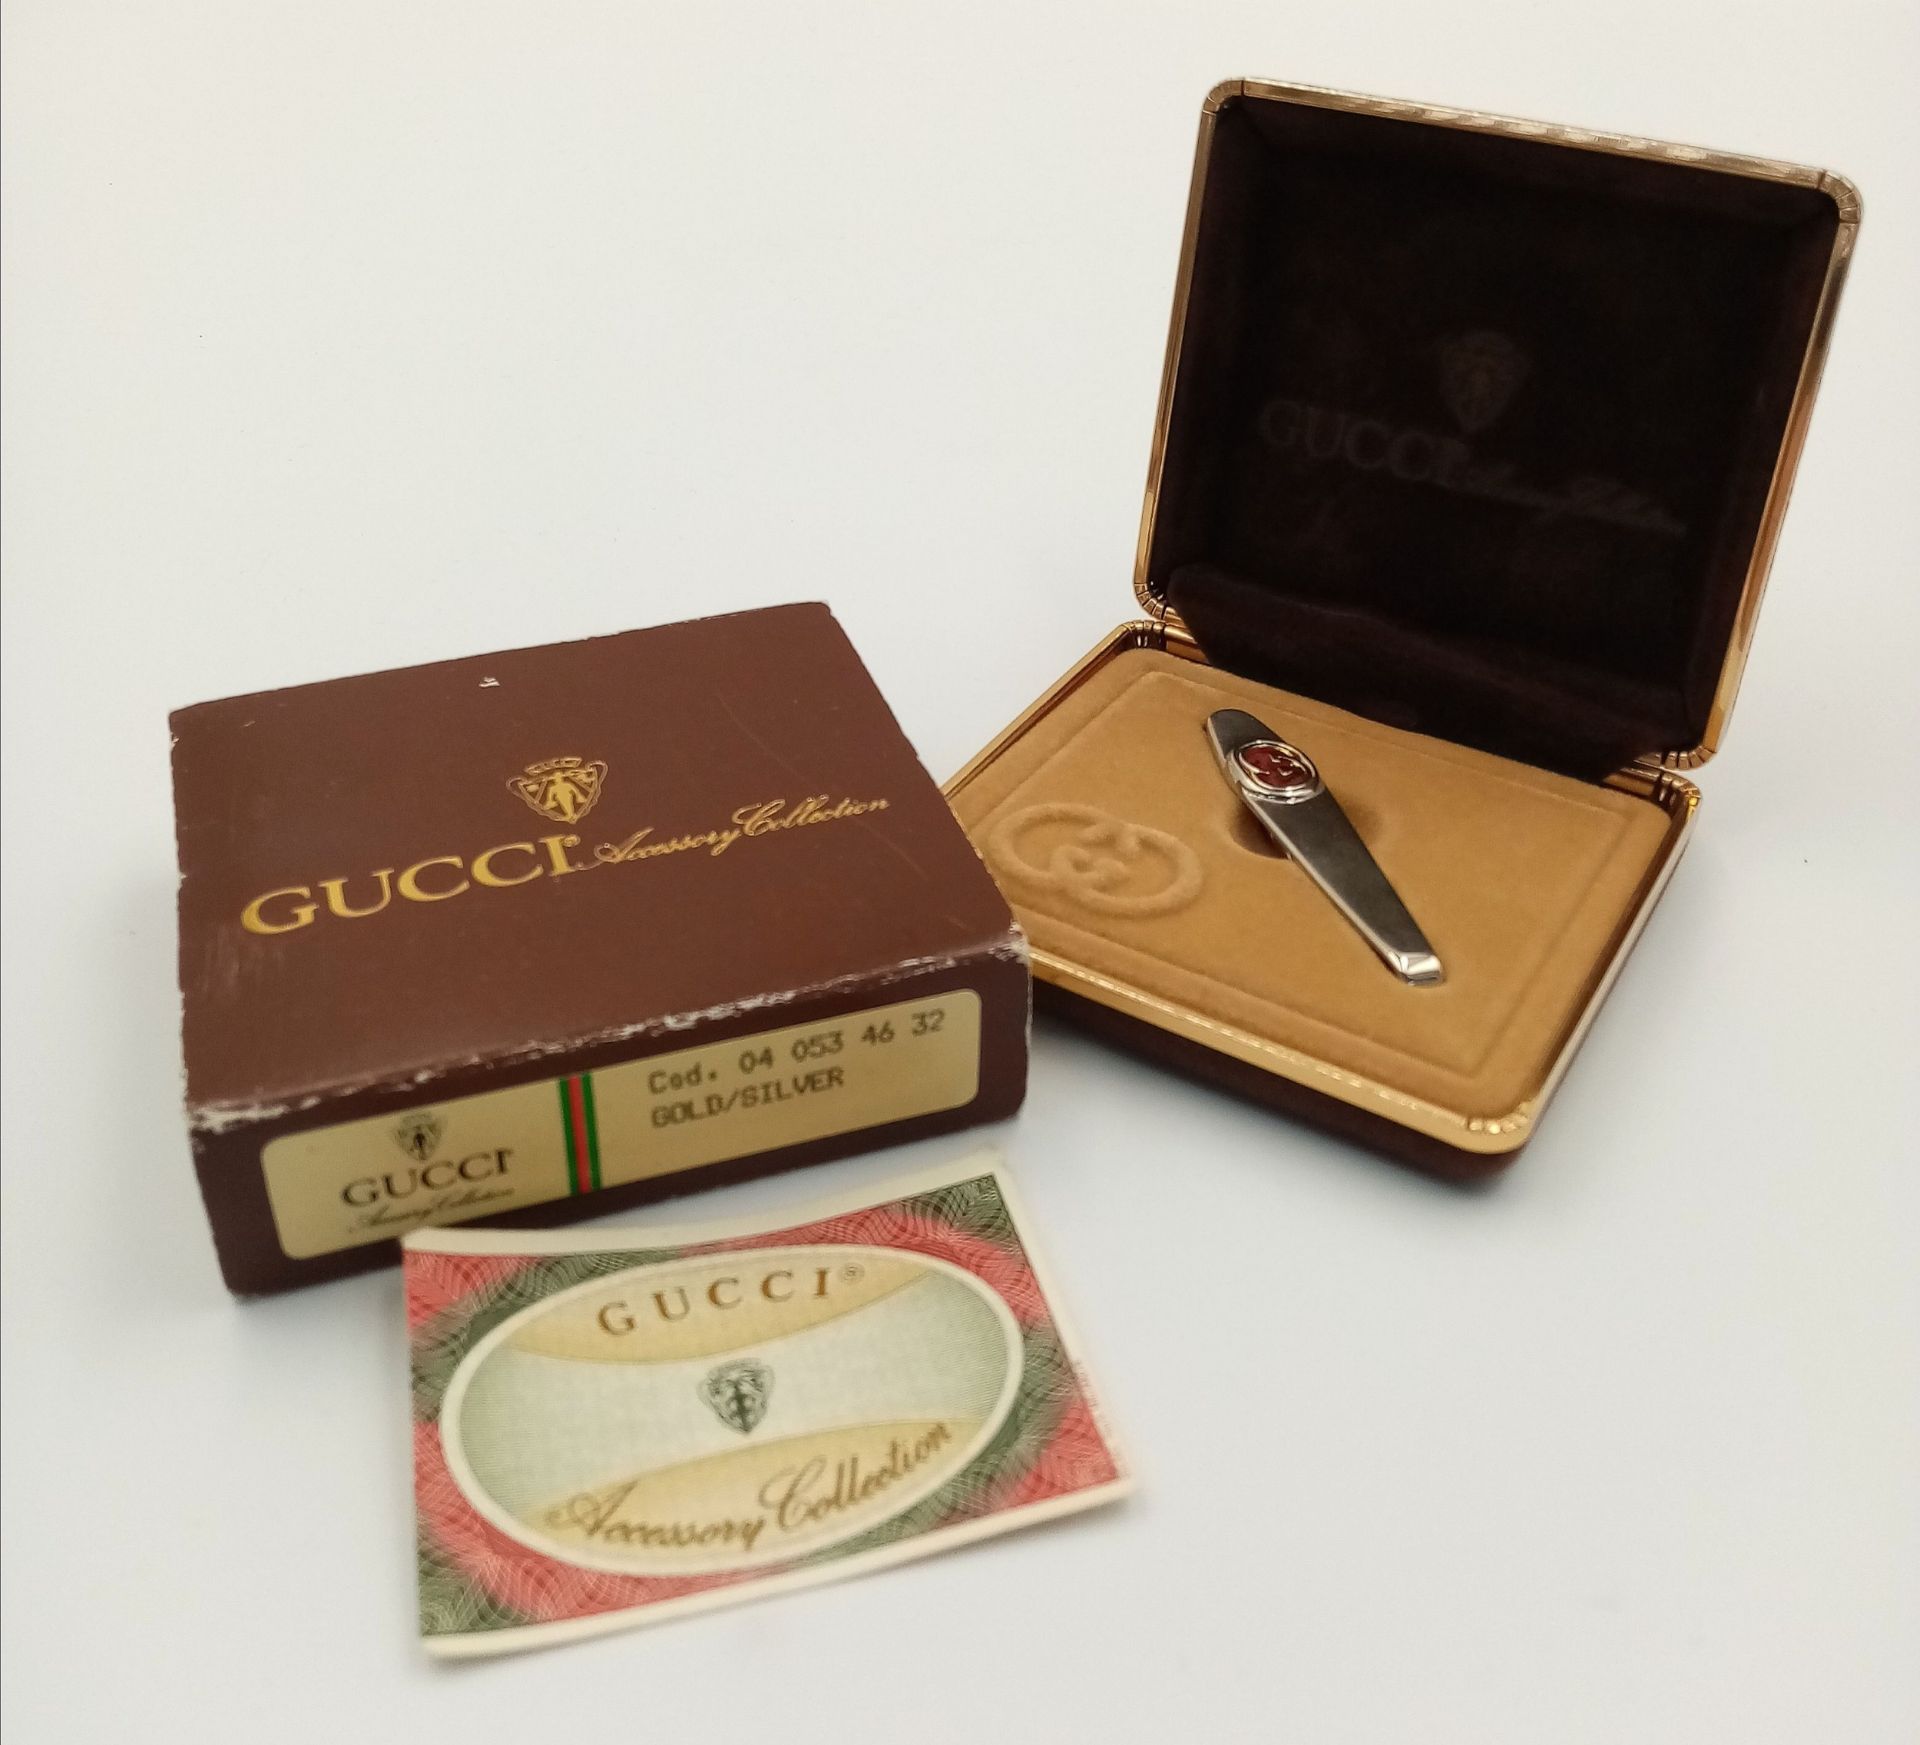 A Gucci Silver Tone Tie Clip. Comes with original packaging. Ref: 016977